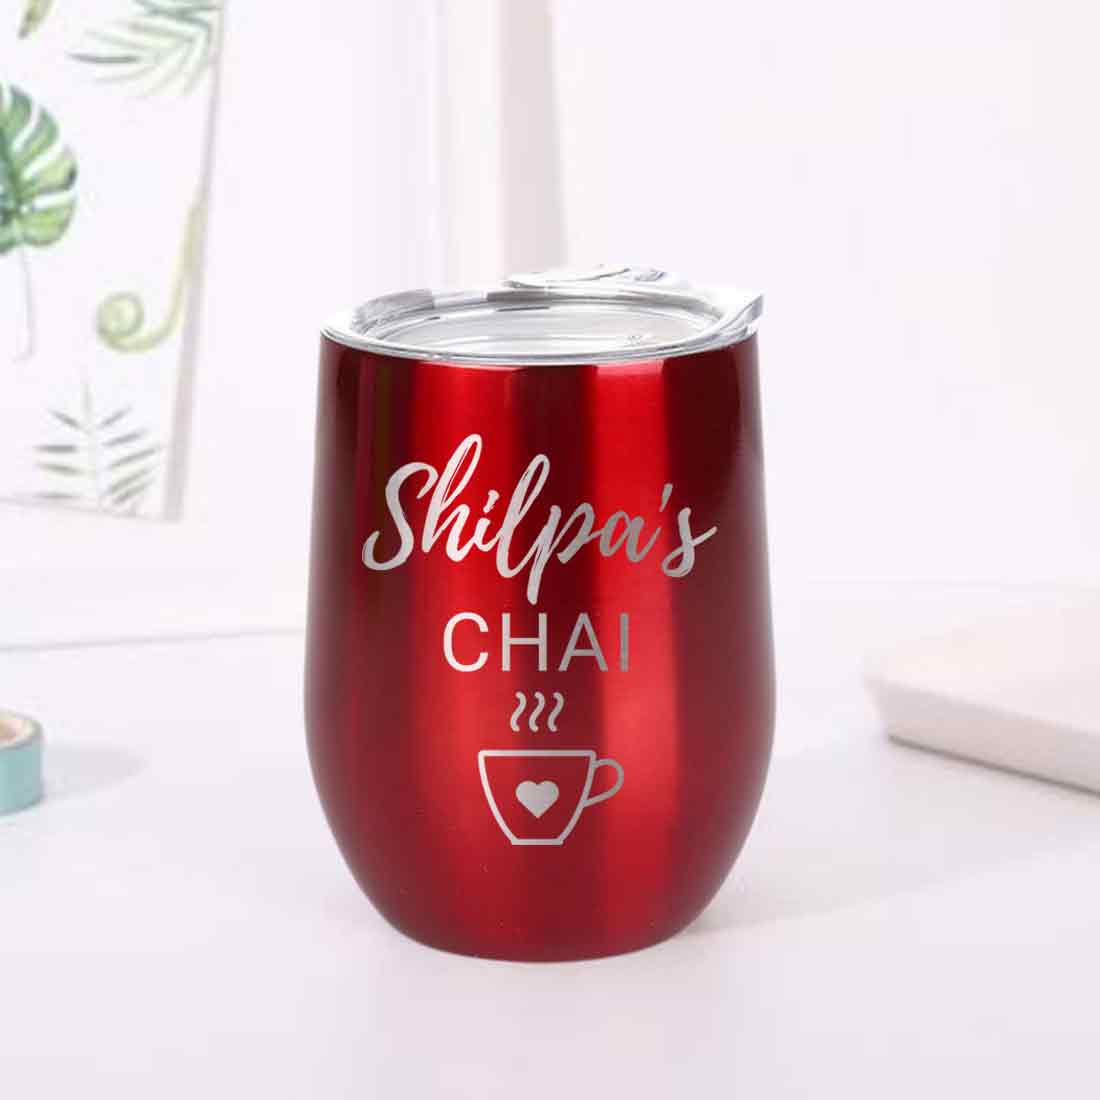 Personalized Coffee Thermos Cup With Name Engraved (350 ML) -Tea Cup